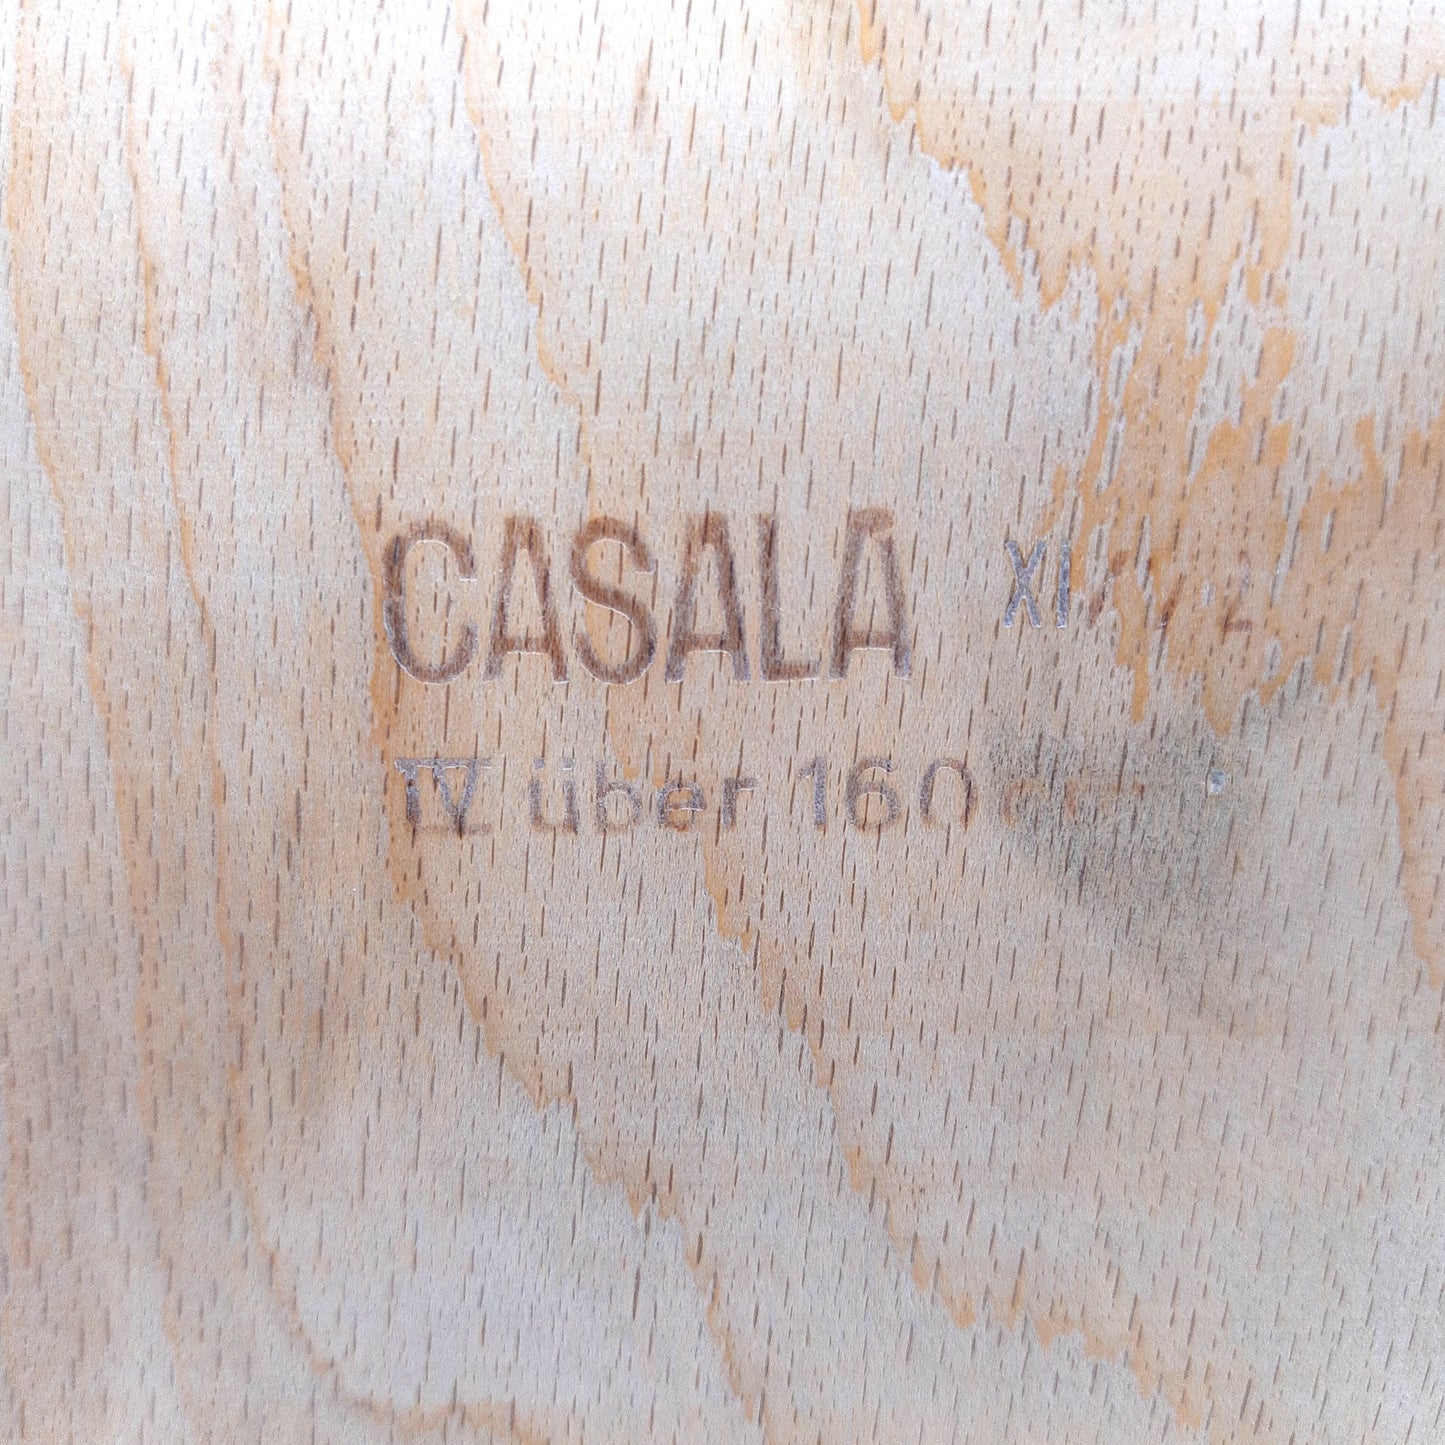 Mid Century Desk Chair by Carl Sasse for Casala - German MCM